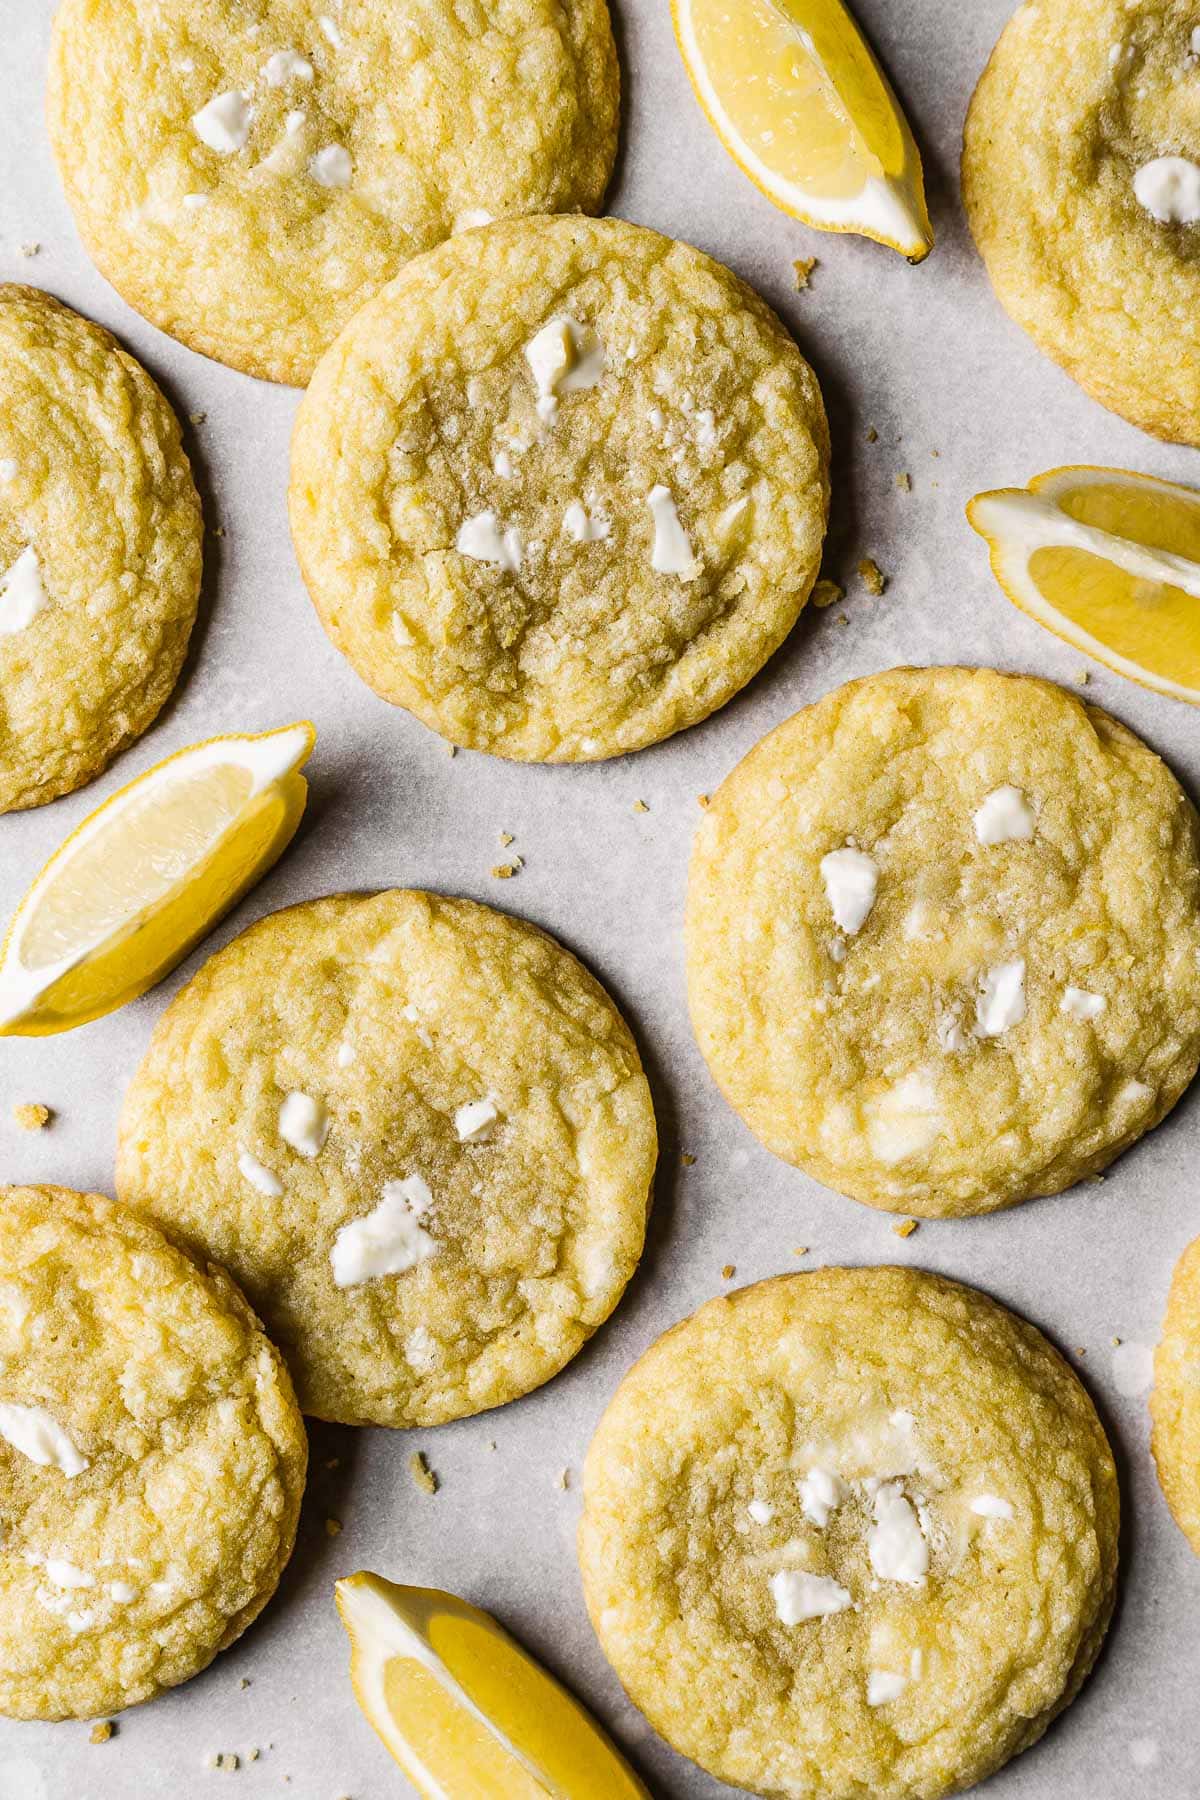 Lemon white chocolate cookies with lemon slices in between on white parchment paper.